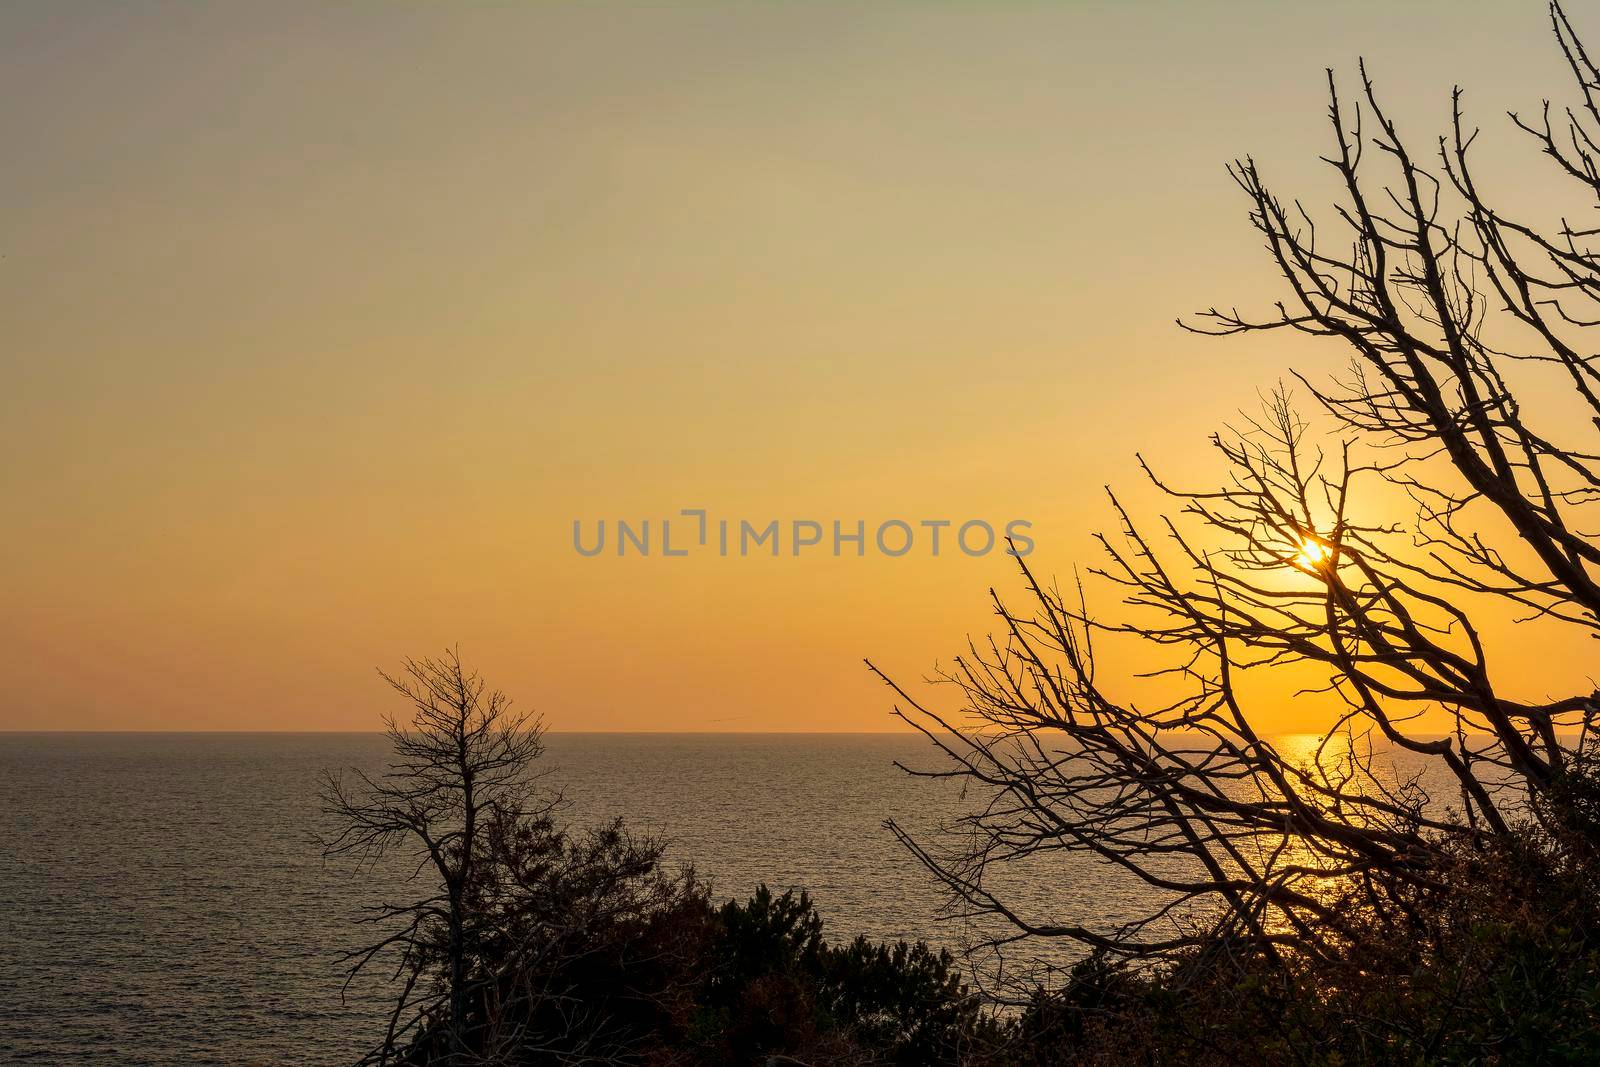 Tree at sunset in Palaiokastro castle of ancient Pylos, Greece